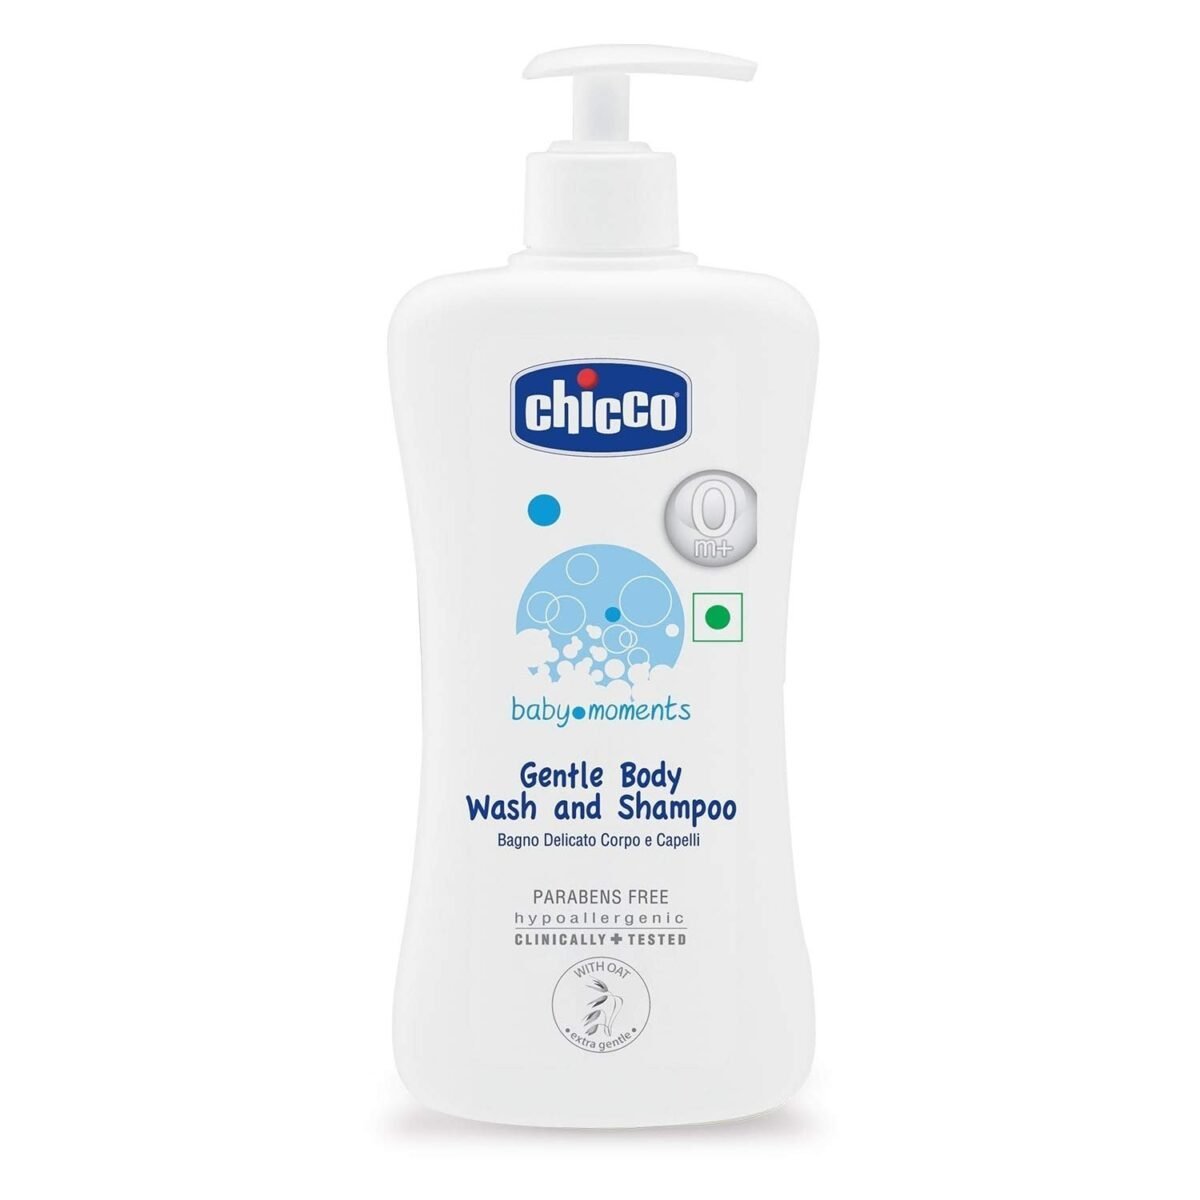 Chicco Baby Moments Gentle Body Wash and Shampoo for Soft Skin and Hair, Dermatologically tested, Paraben free (500 ml)